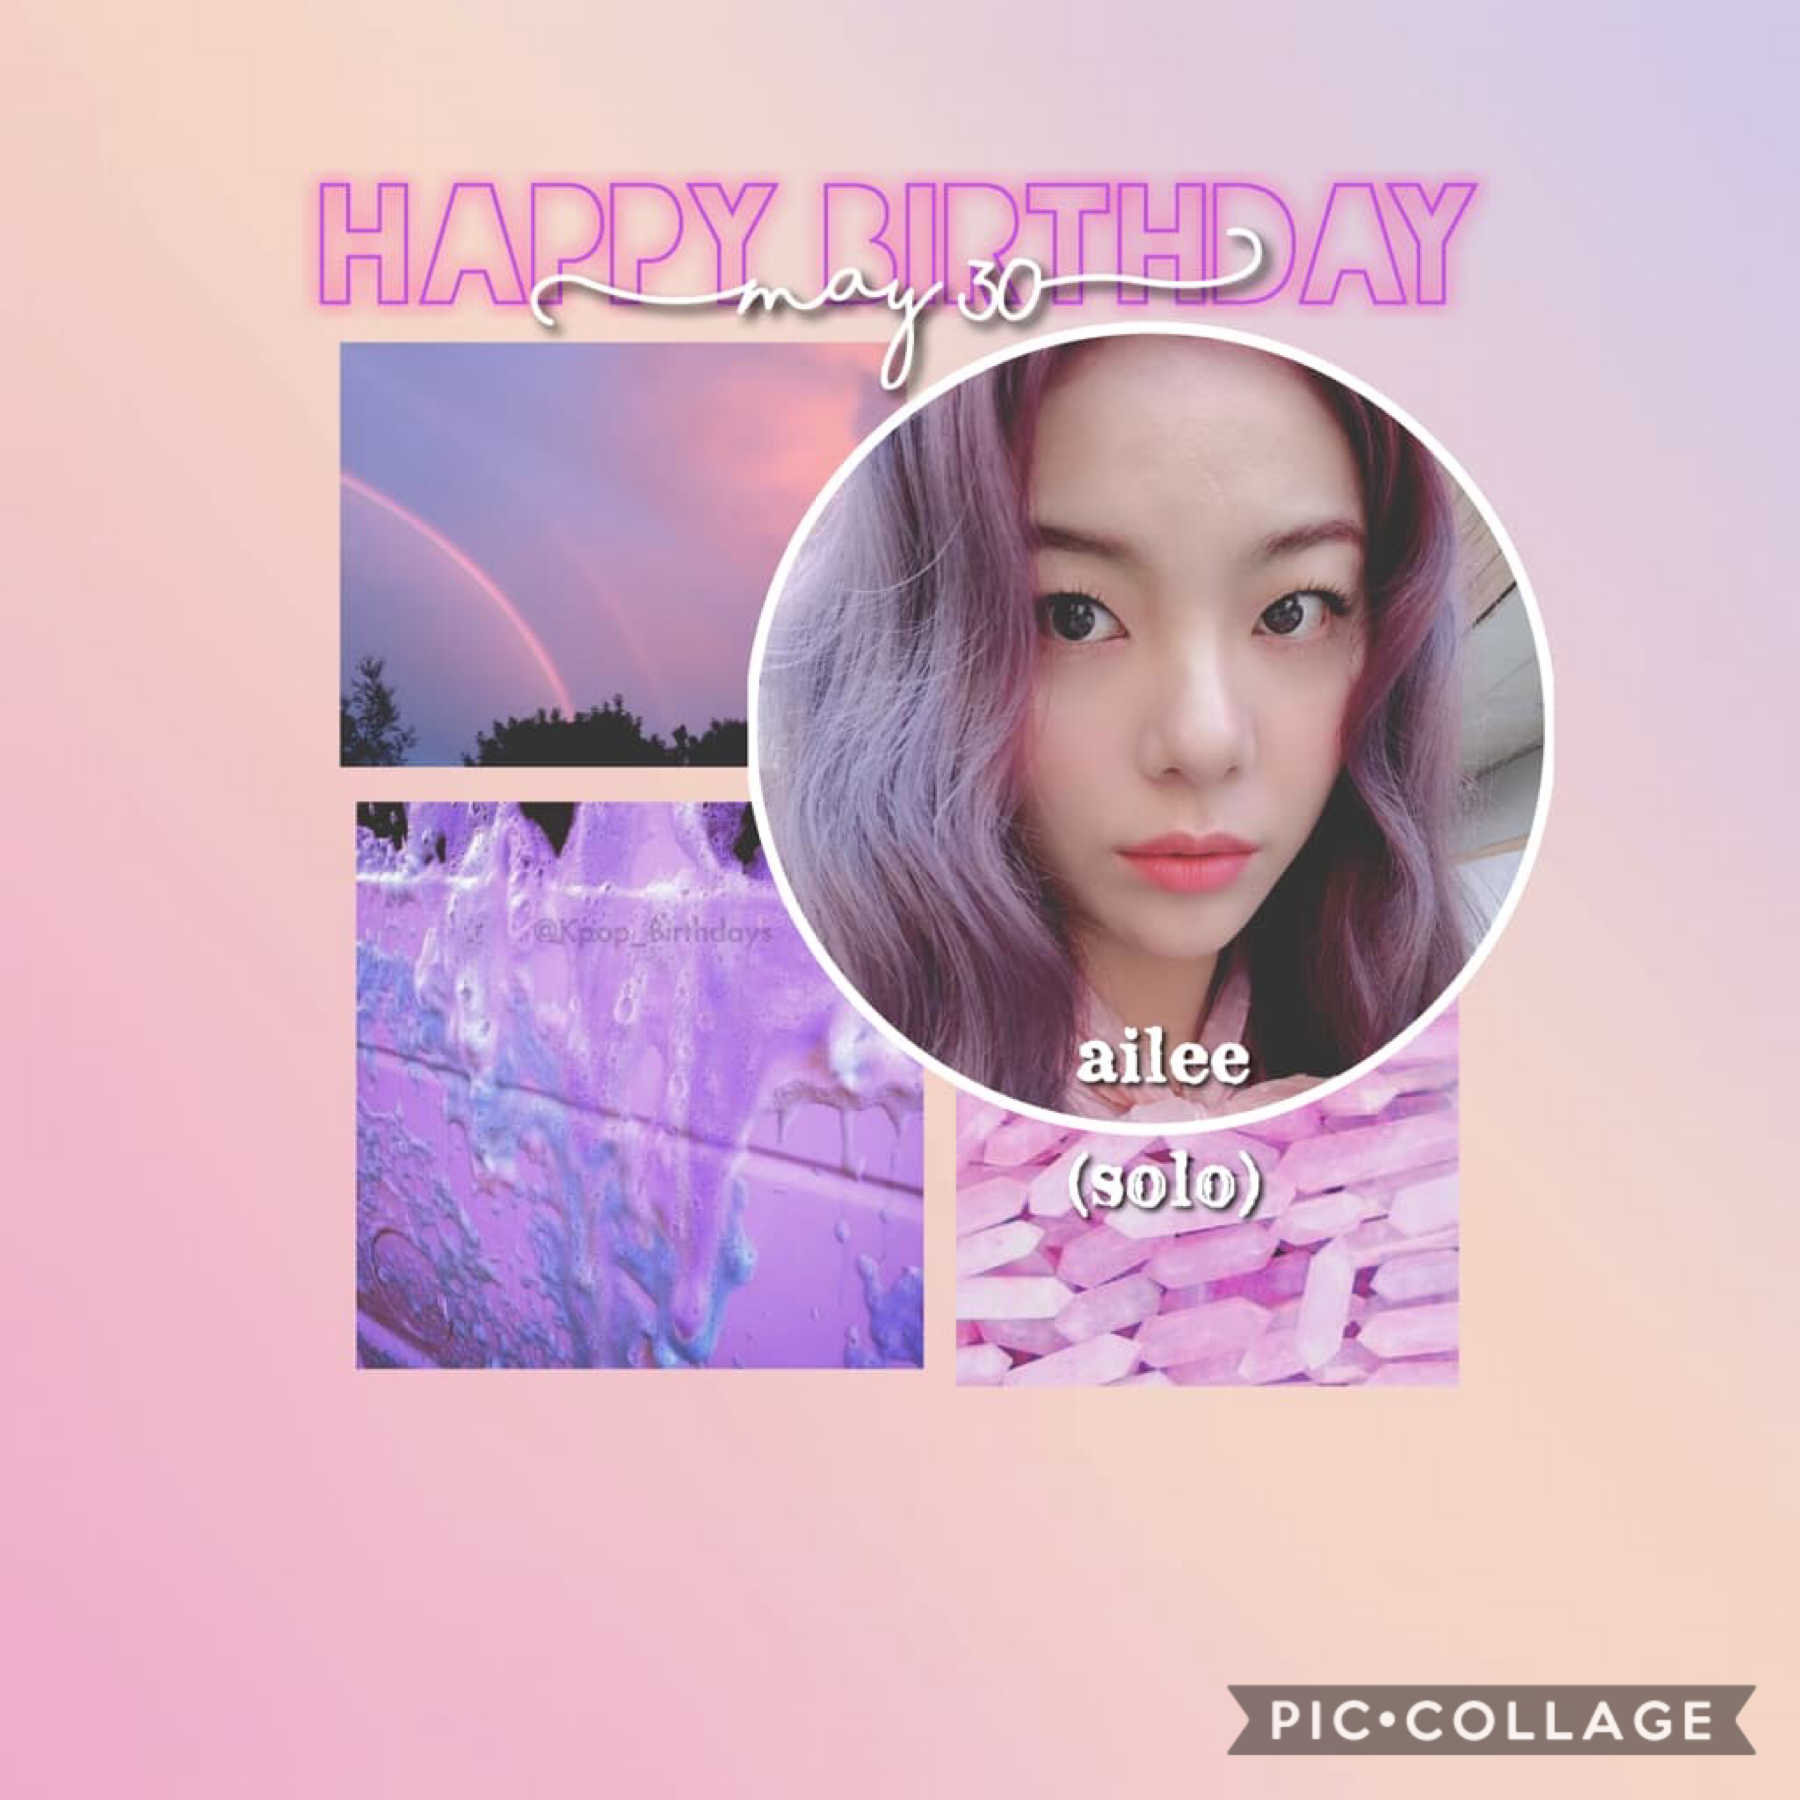 •🌷🌹•
happy birthday to this queen!! she has one heck of vocals 😳😳
Other birthdays:
•THE BOYZ’s Jacob~ May 30
•NATTY~May 30
•GFRIEND’s Eunha~ May 30
•Girl Generation’s Yoona~ May 30
•MCND’s Castle J~ May 31
🌹🌷~Drea~🌷🌹